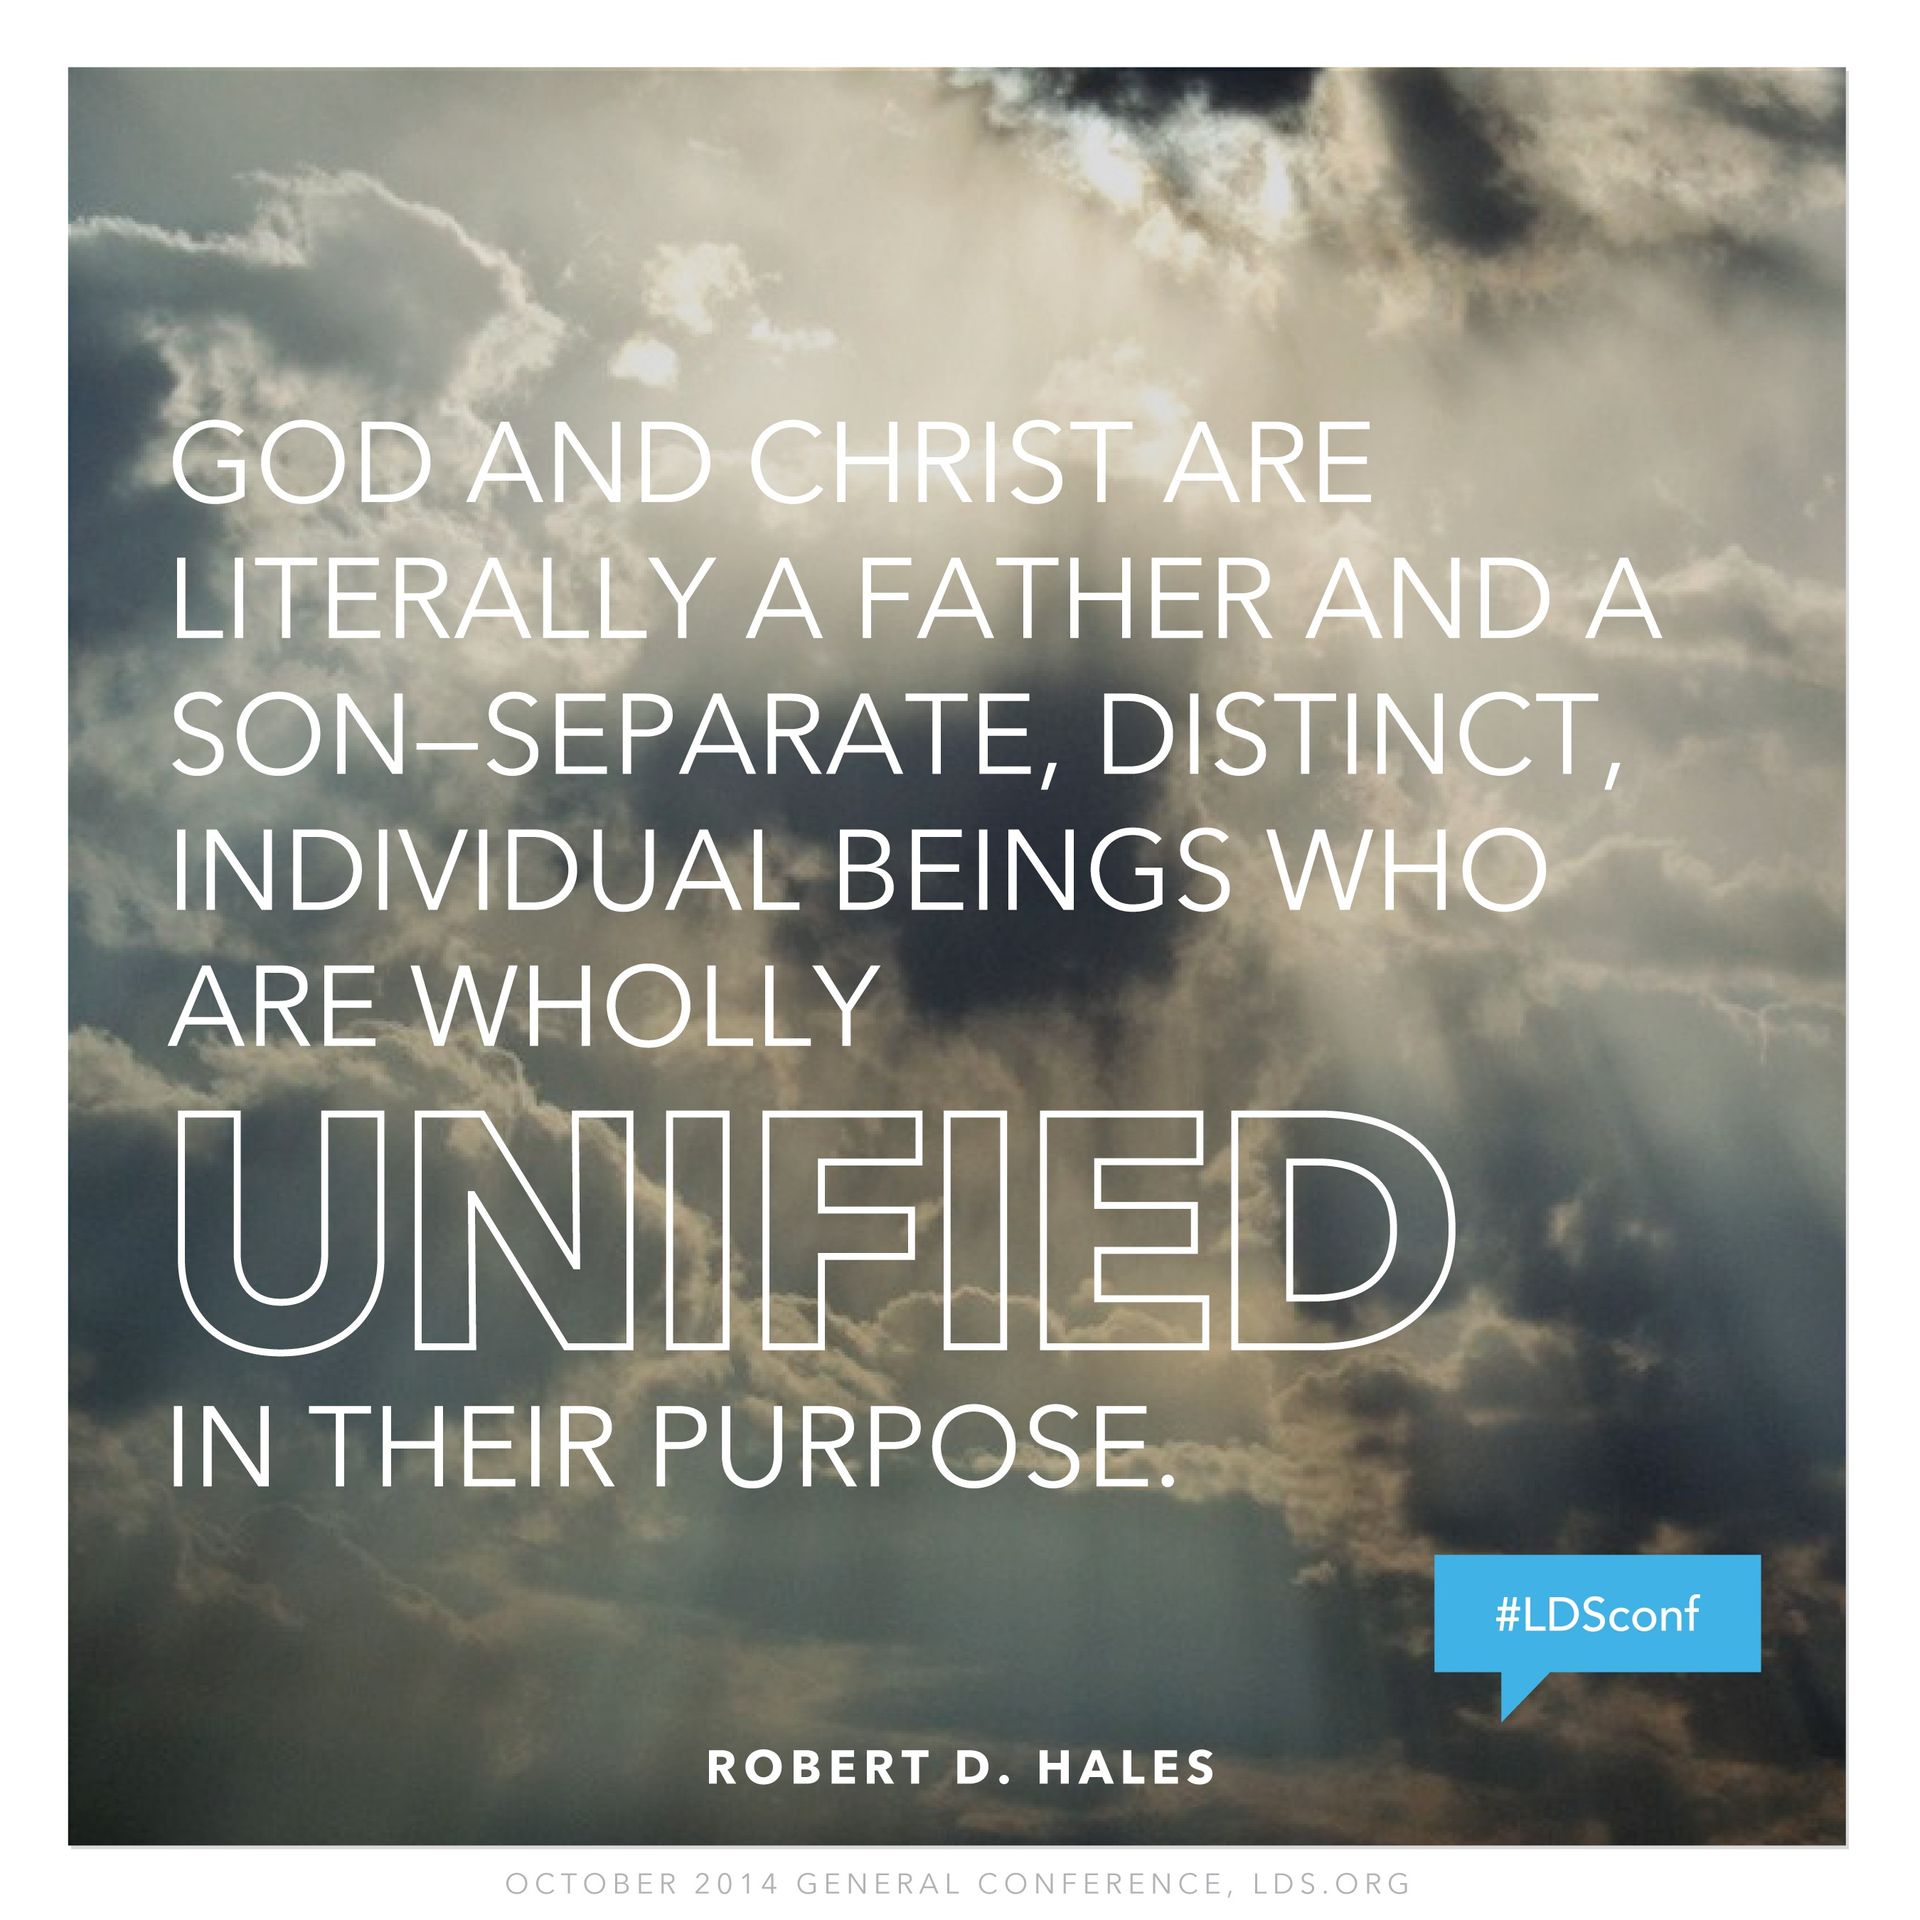 “God and Christ are literally a Father and a Son—separate, distinct, individual beings who are wholly unified in Their purpose.”—Elder Robert D. Hales, “Eternal Life—to Know Our Heavenly Father and His Son, Jesus Christ” © undefined ipCode 1.